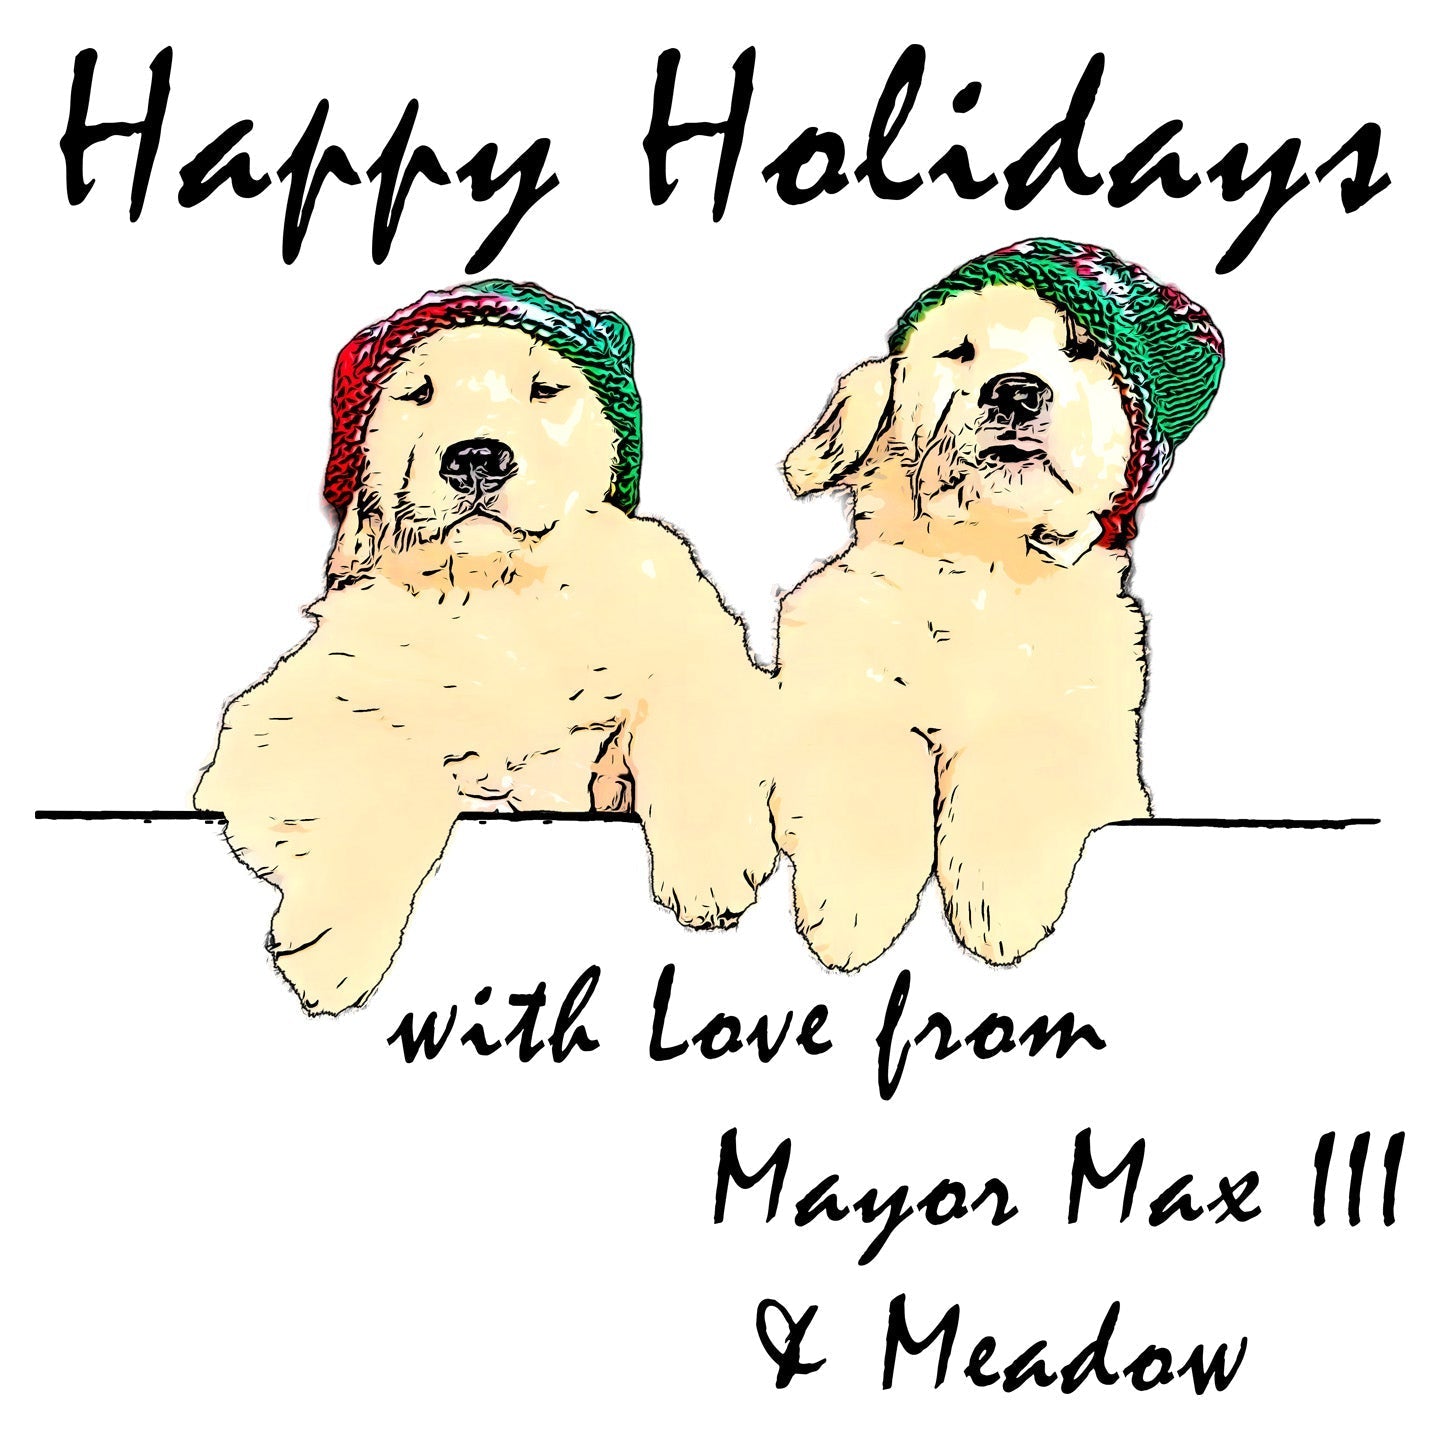 Happy Holidays from Mayor Max III and Meadow - Kids' Unisex T-Shirt